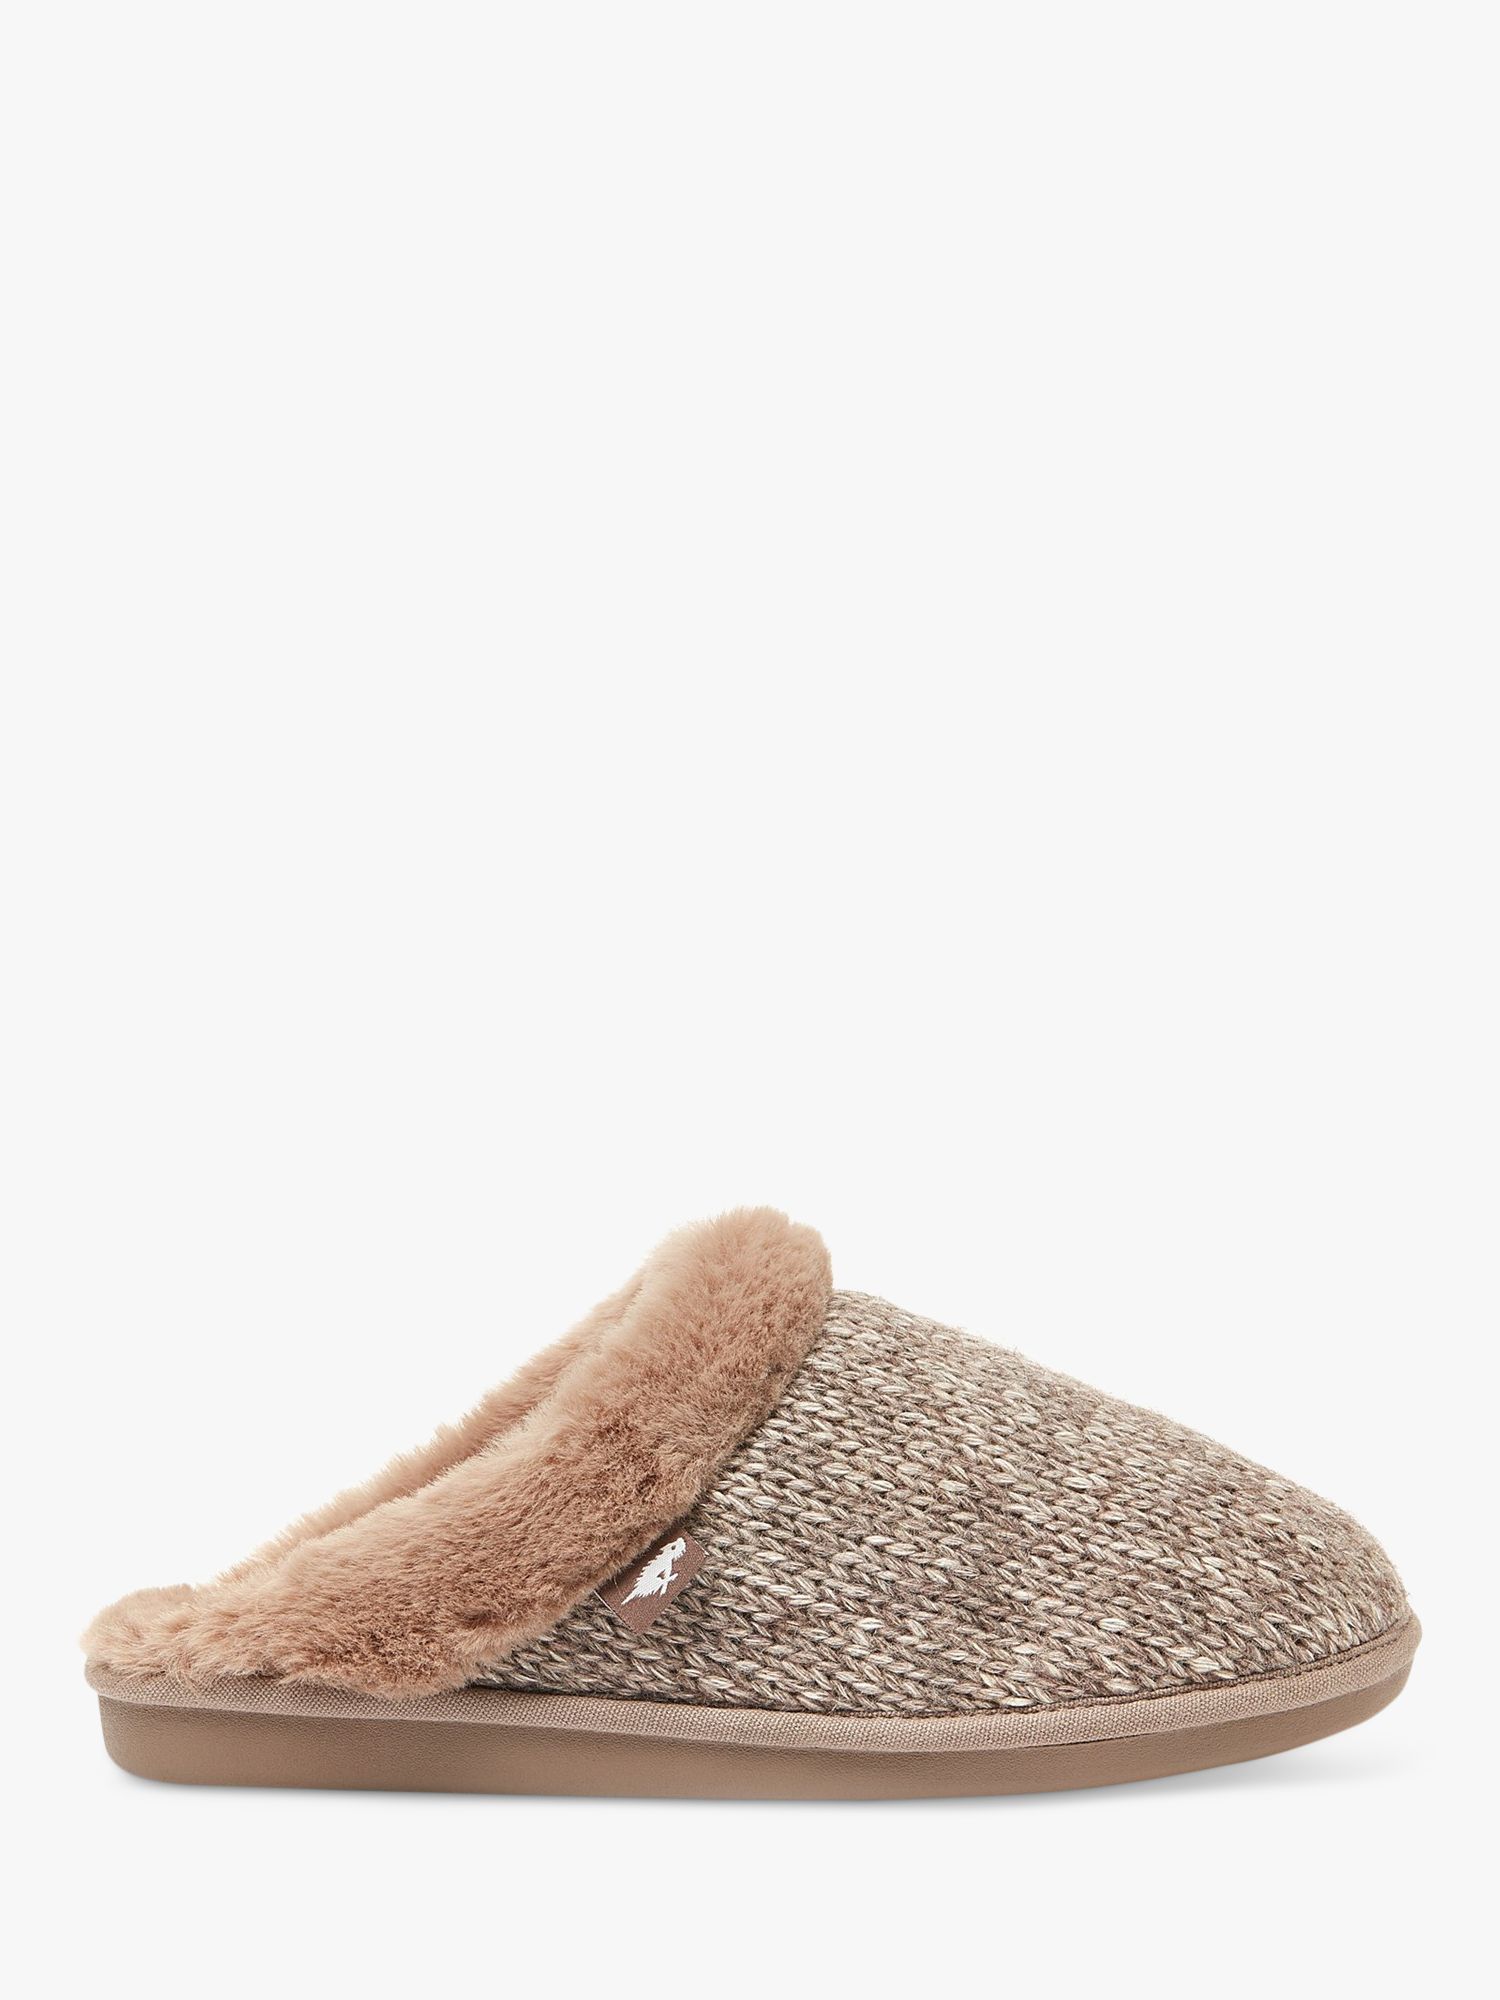 Rocket Dog Rosie Faux Fur Lined Slippers, Camel at John Lewis & Partners